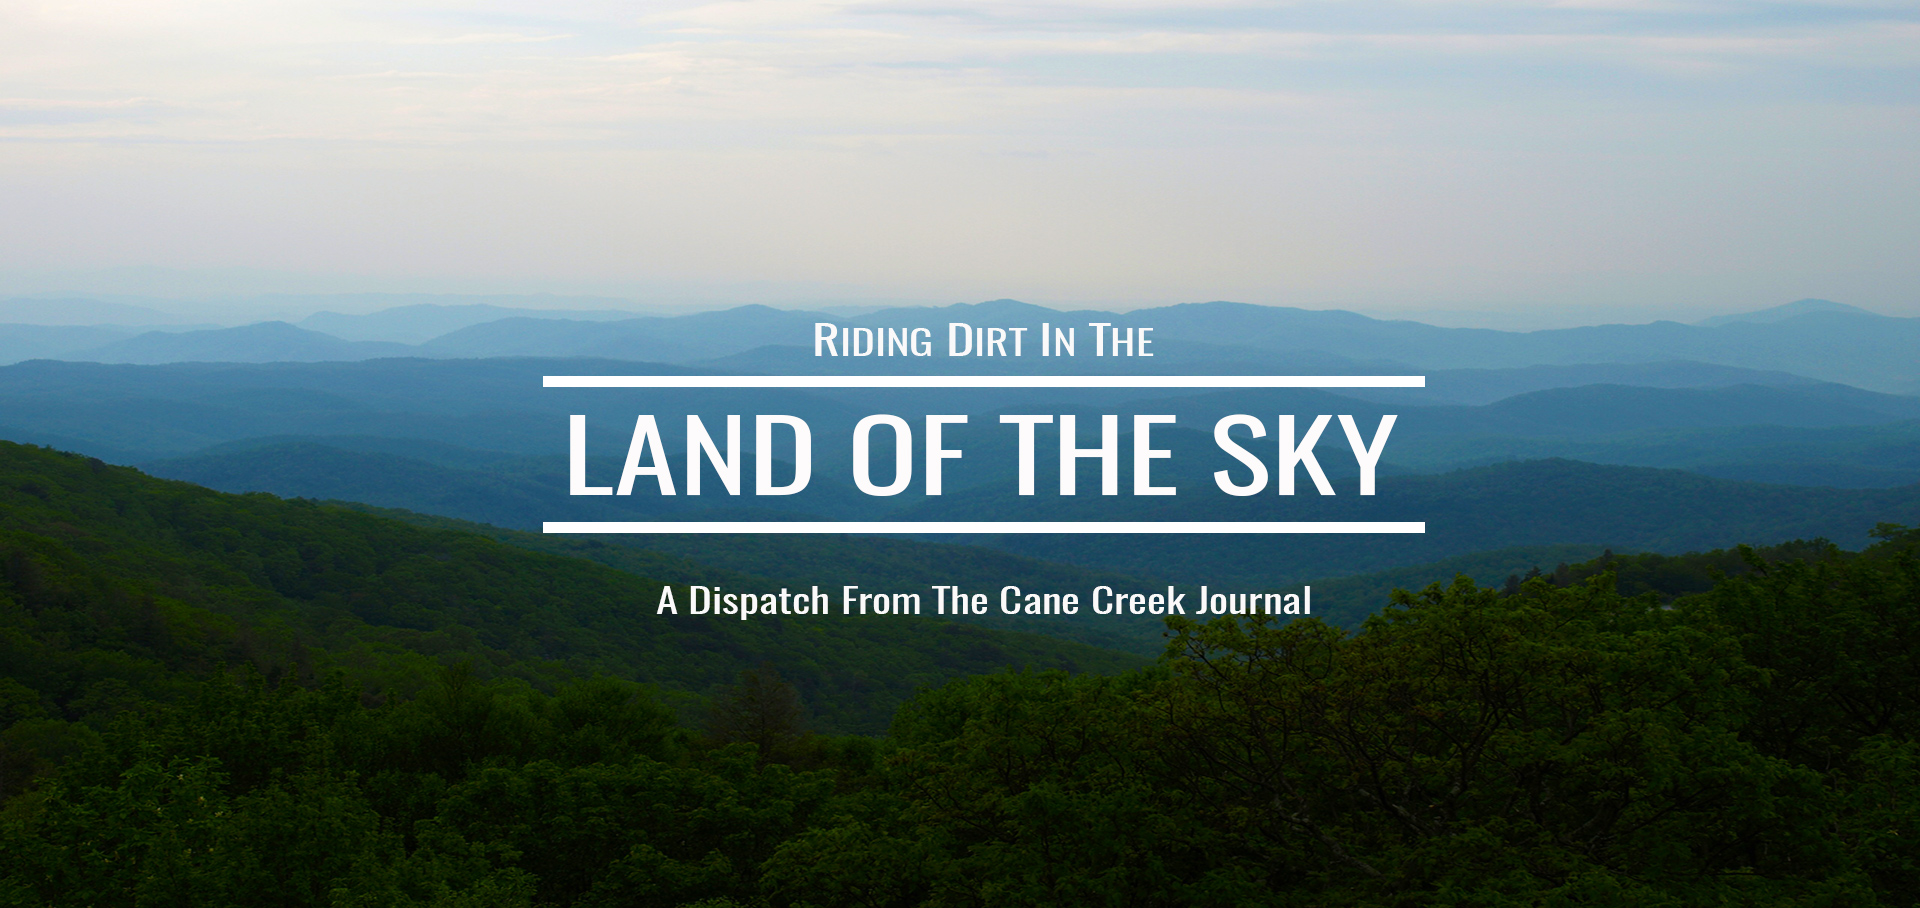 Riding dirt in the land of the sky